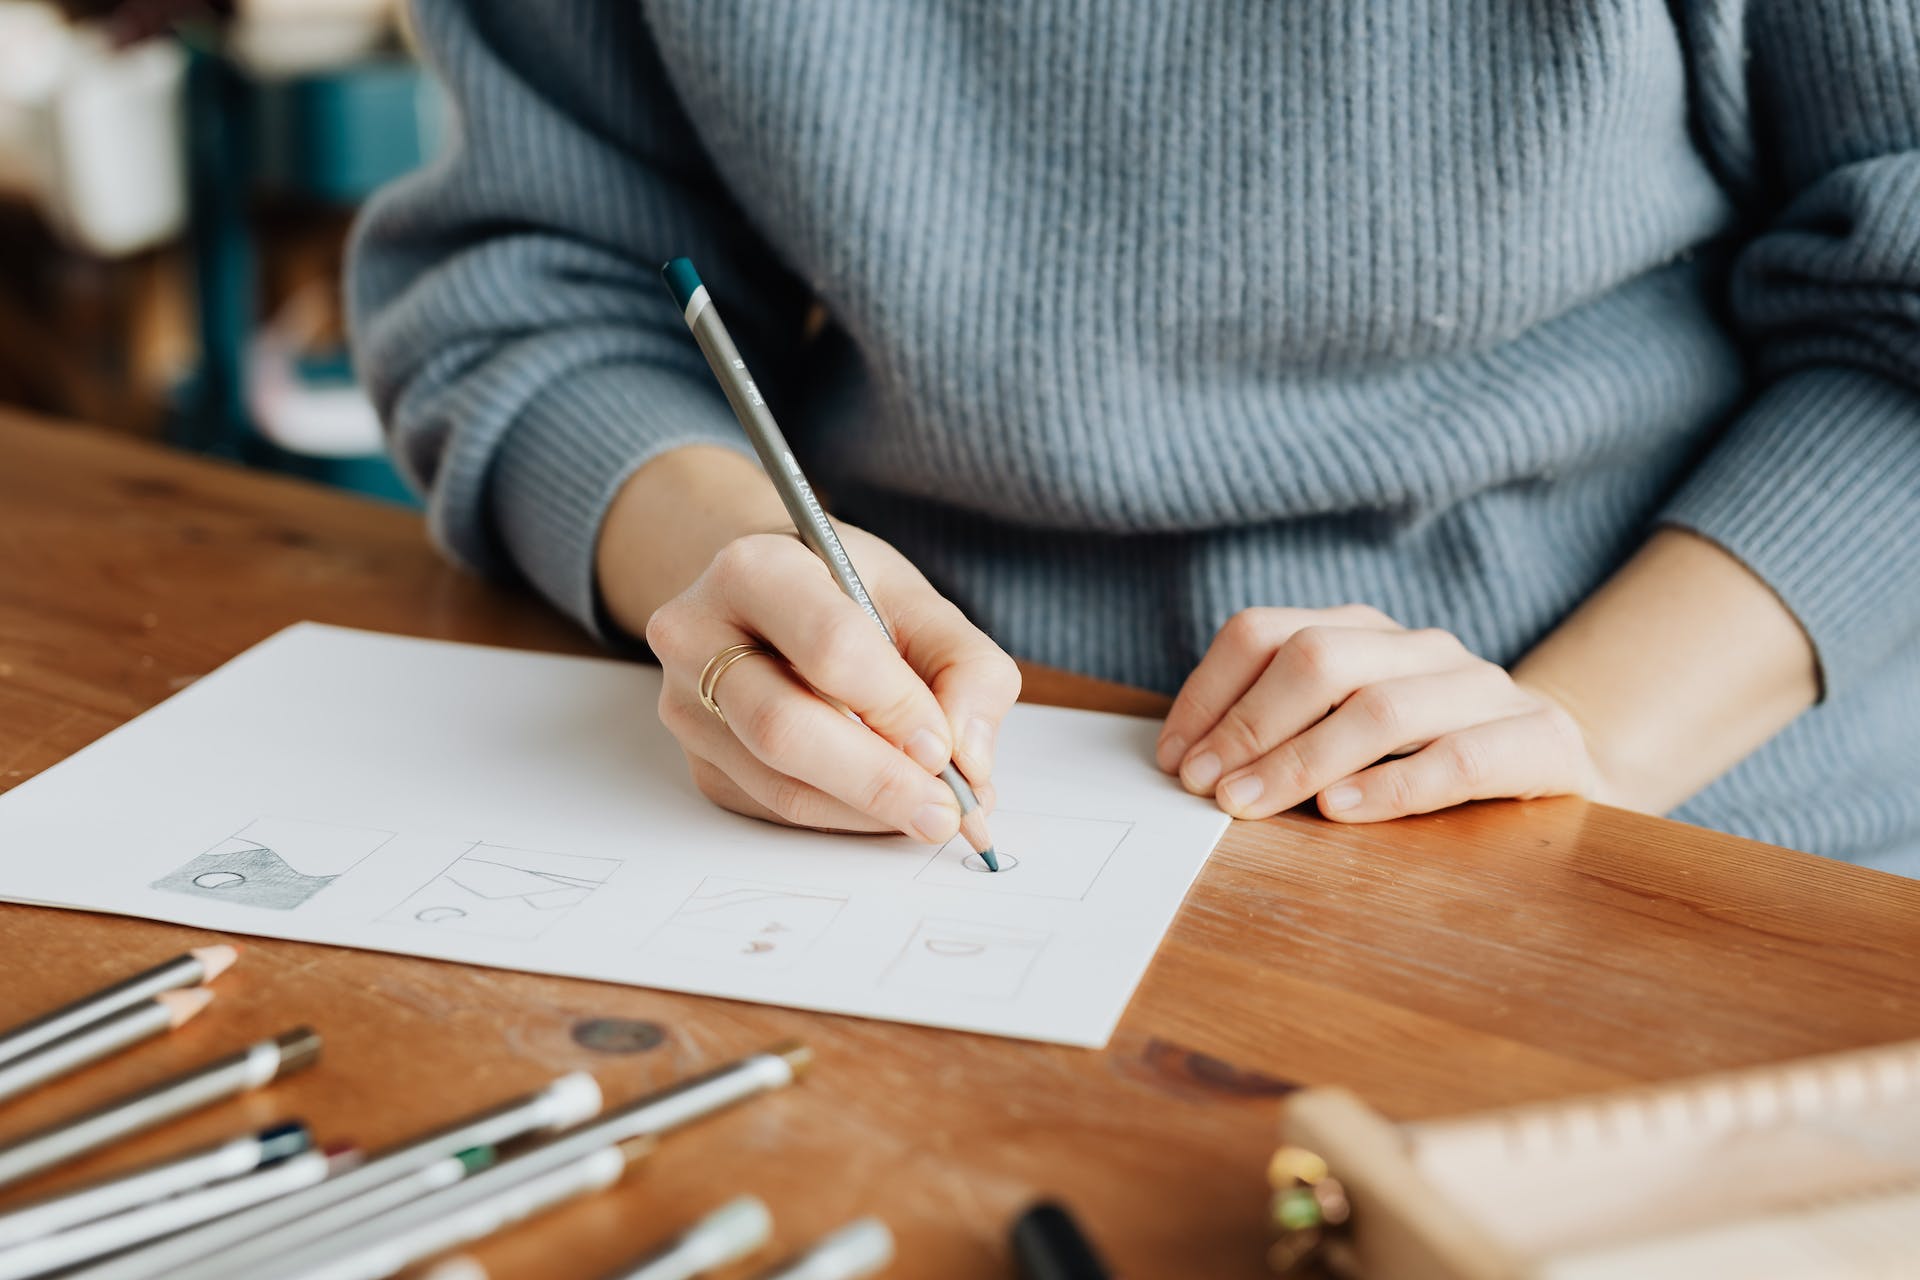 Person sketching on paper | Source: Pexels